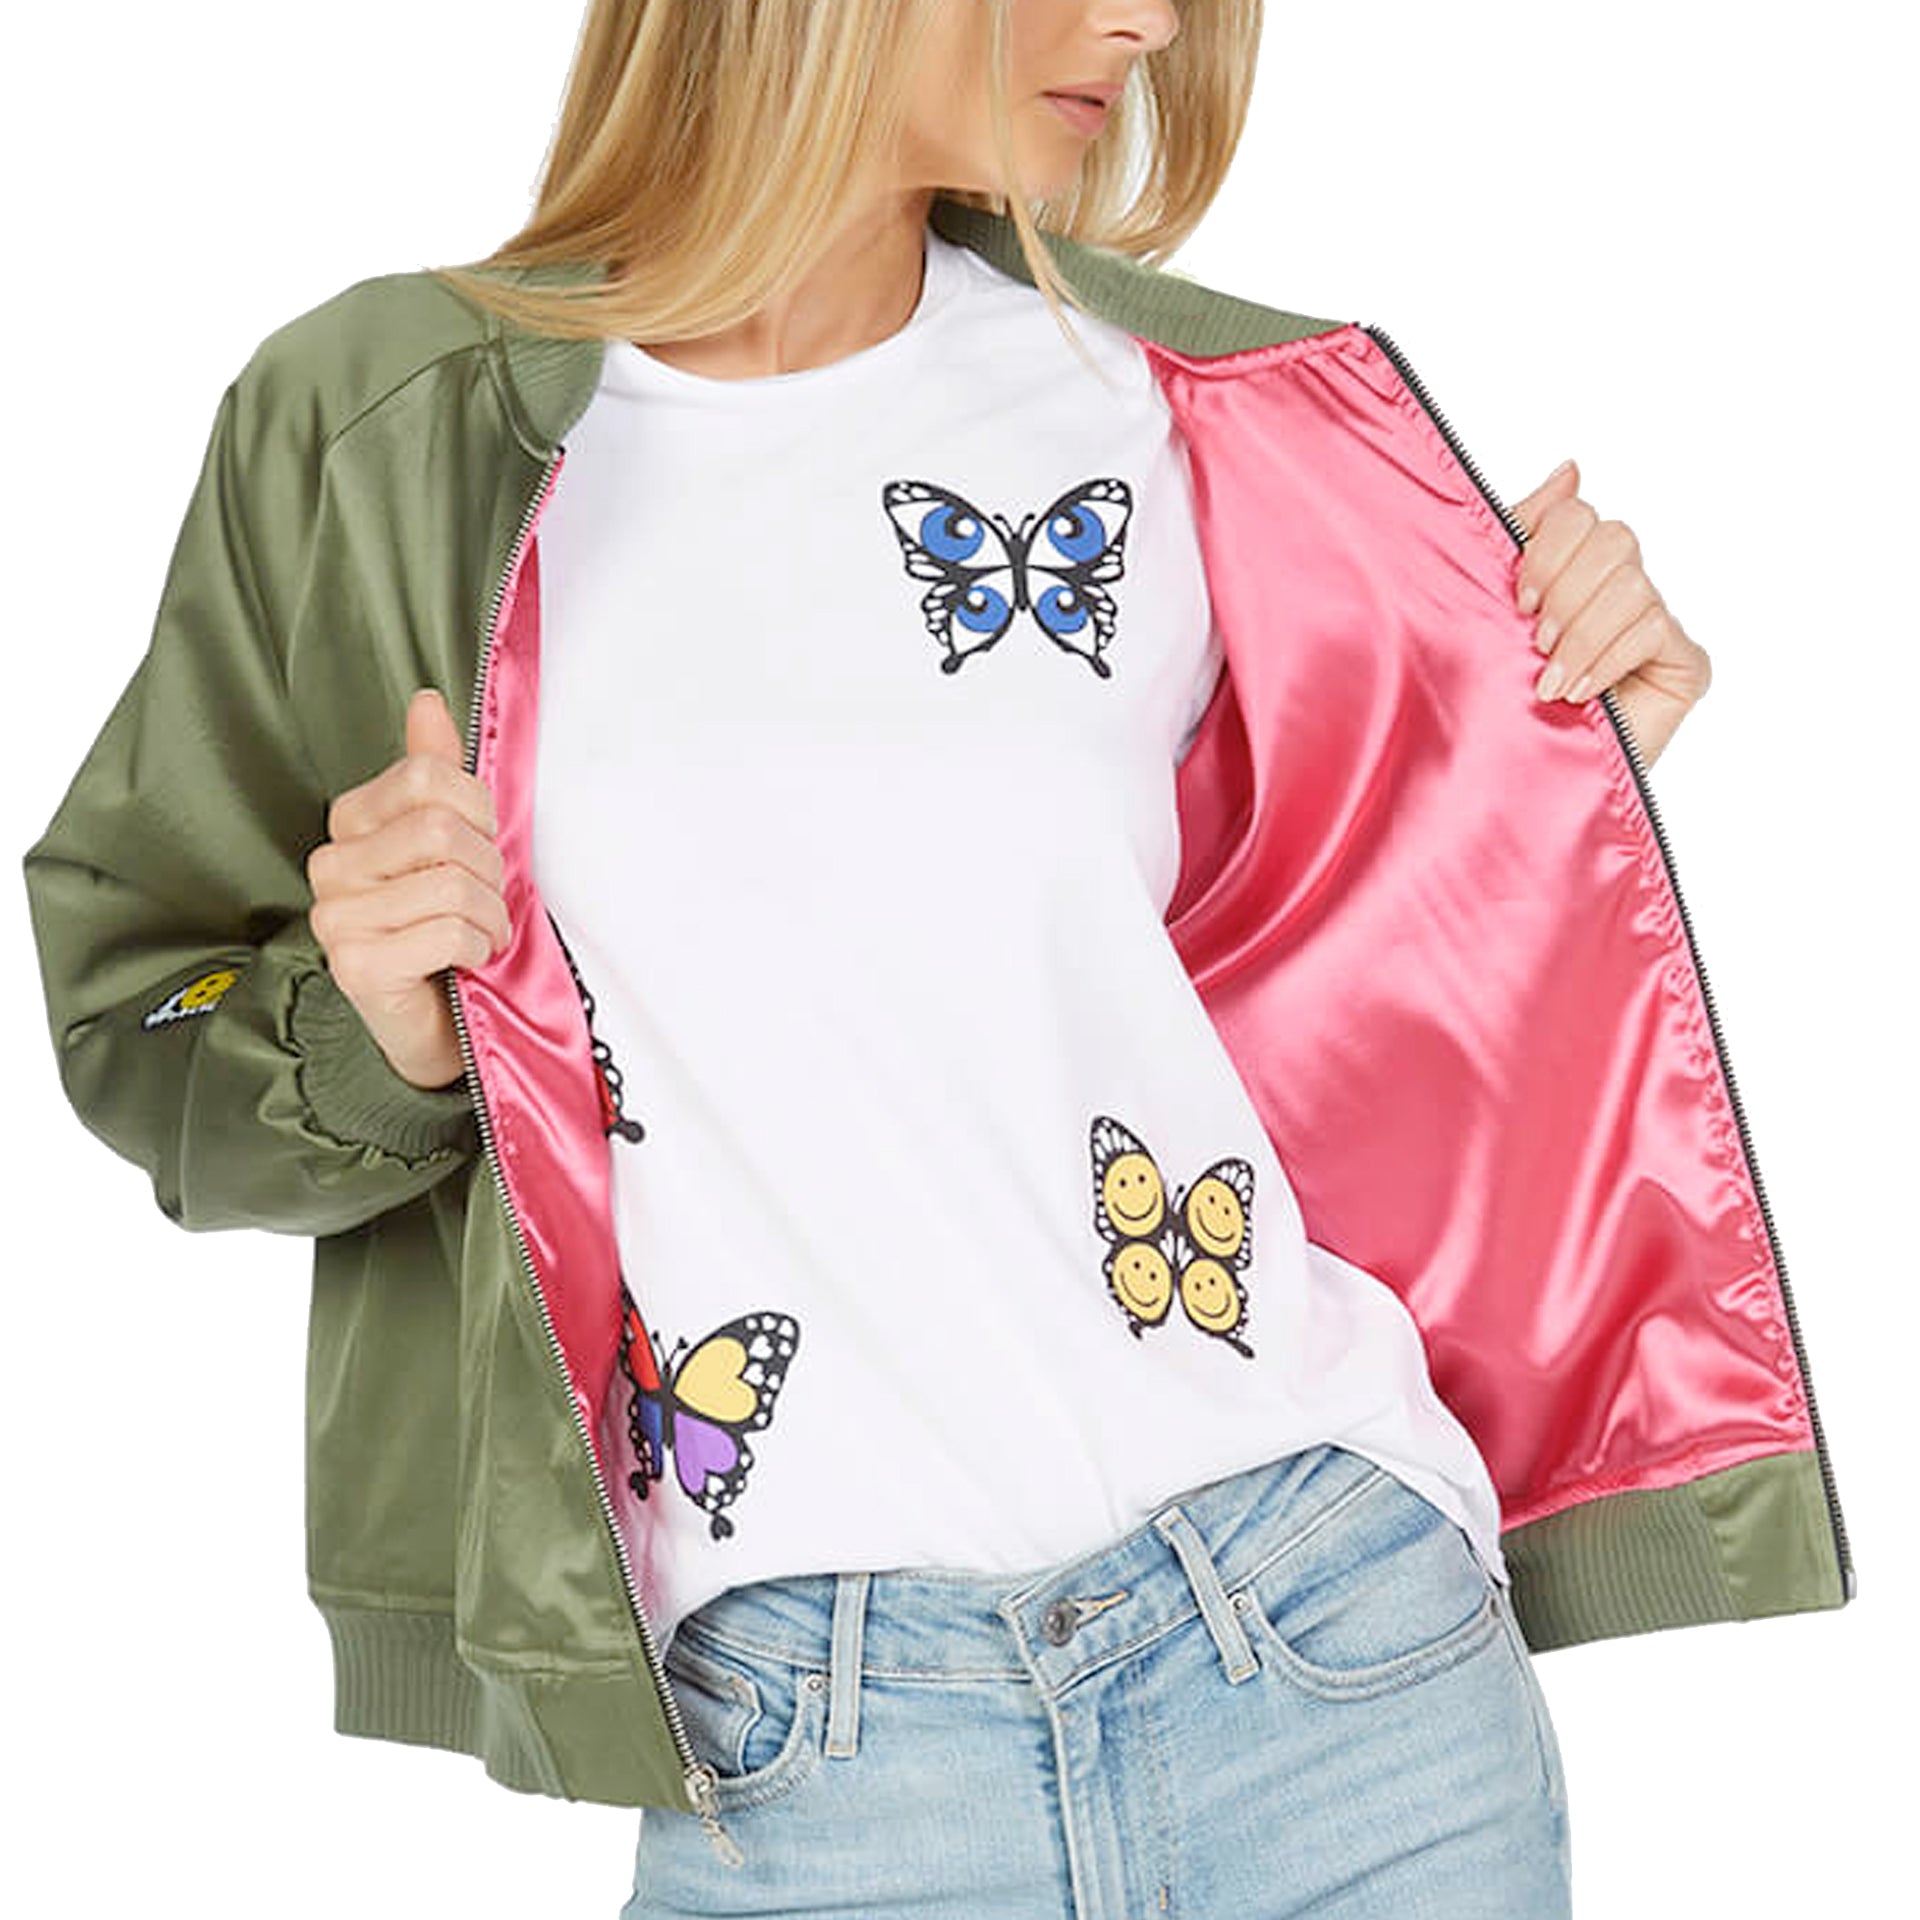 Levelle Butterfly Patches Bomber Jacket, Lauren Moshi - RSVP Style